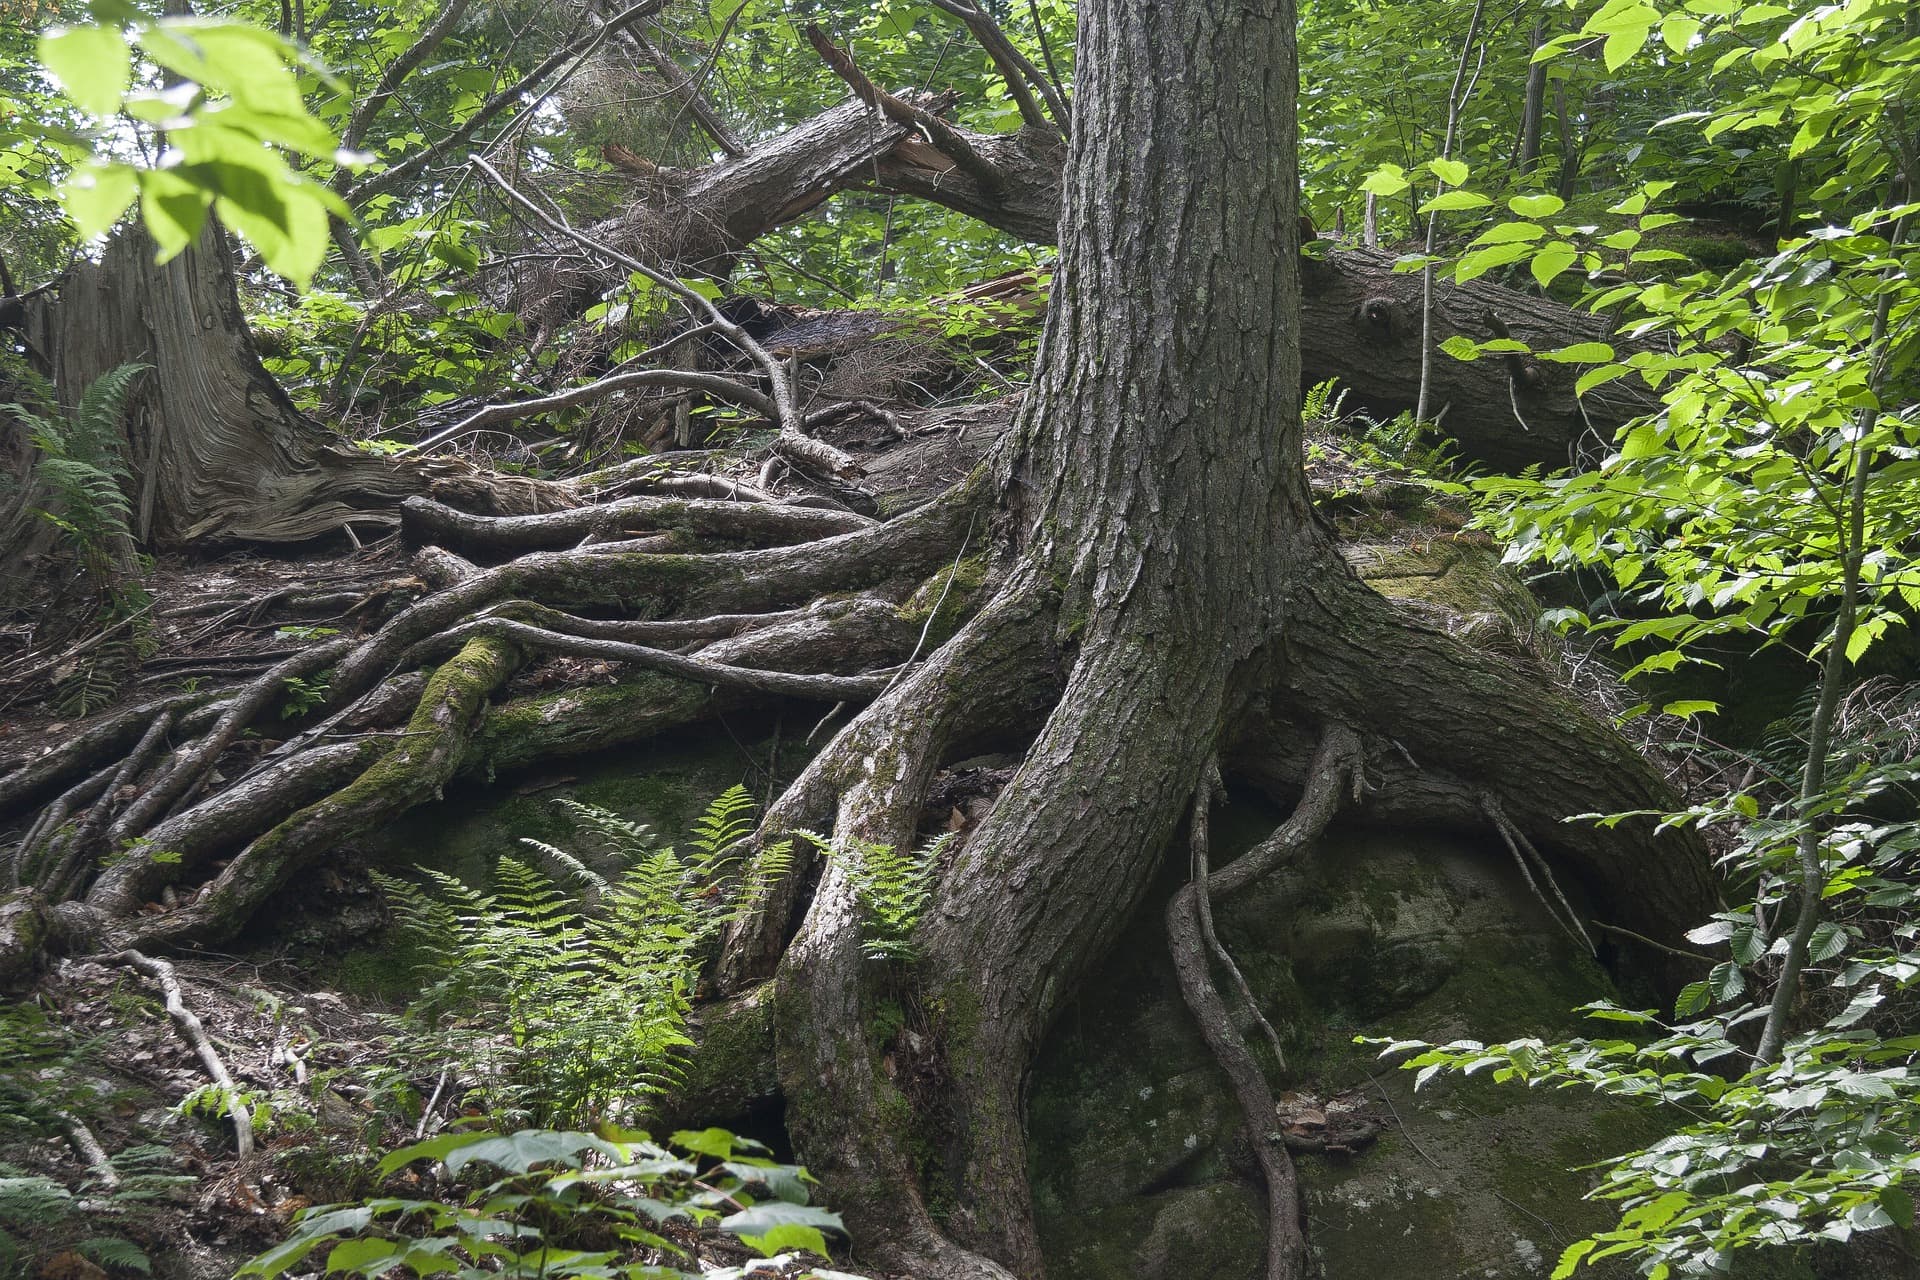 Roots of tree firmly grounded